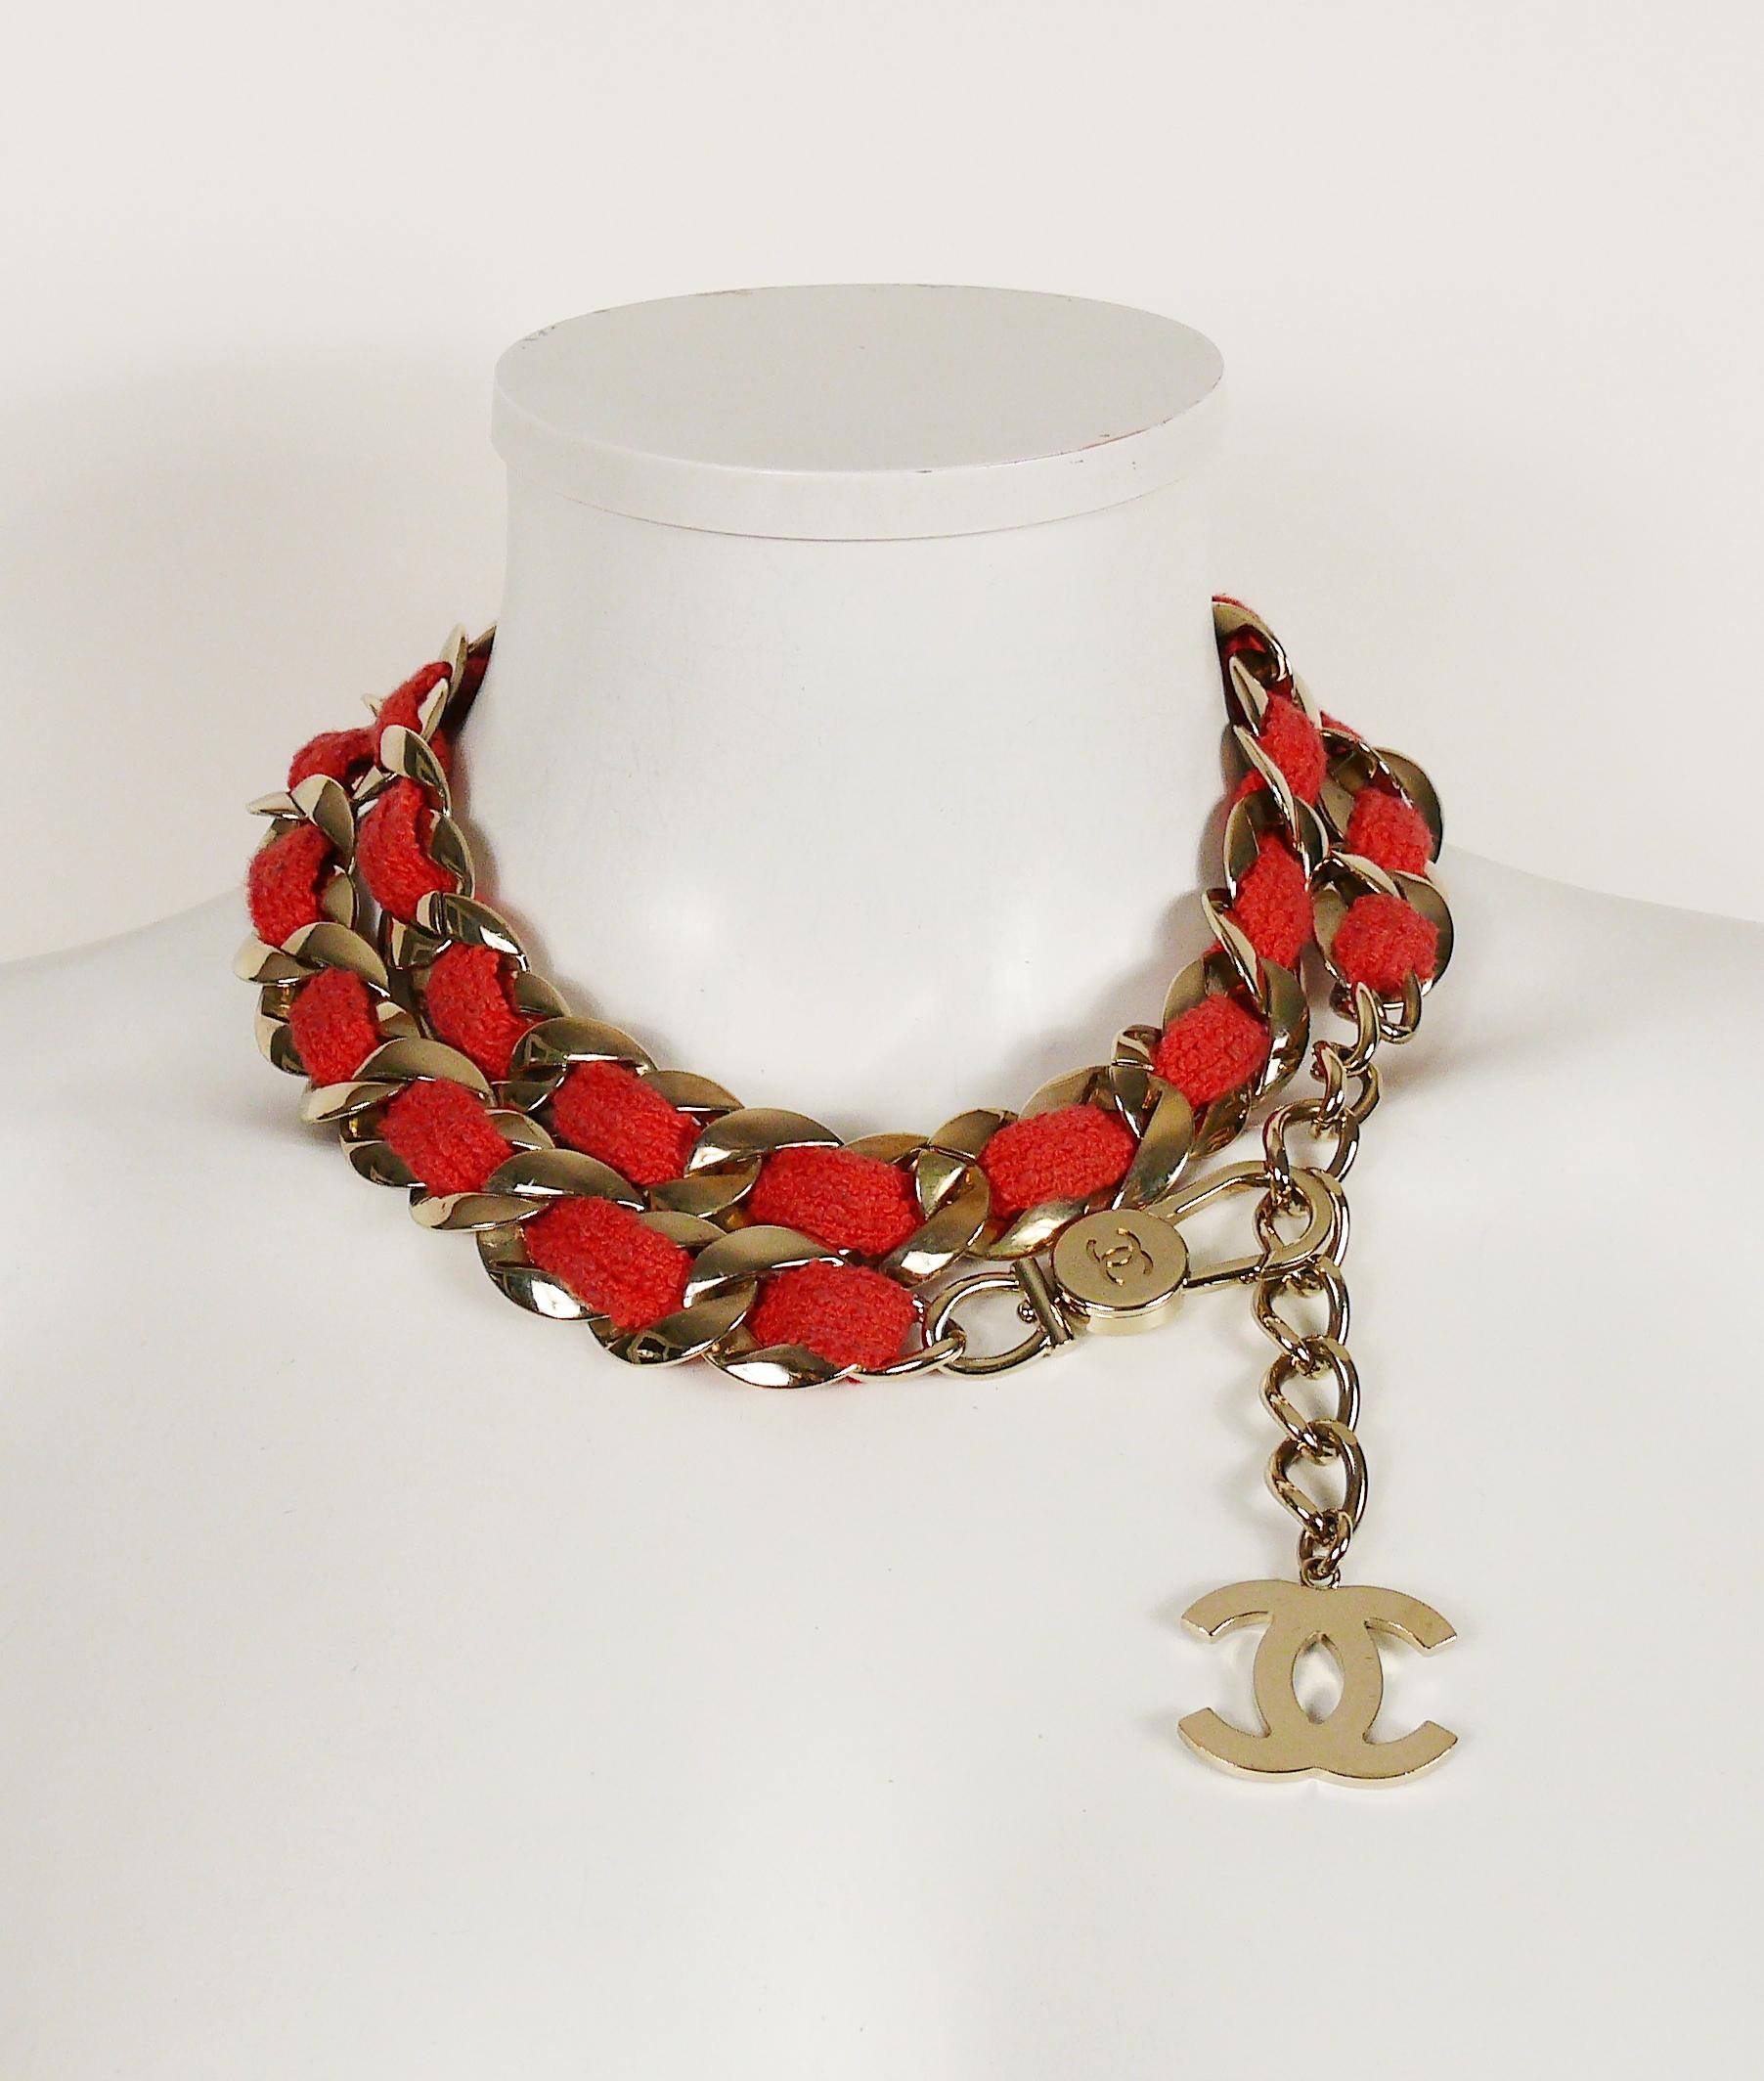 Chanel Chain and Coral Tweed Belt Necklace 4